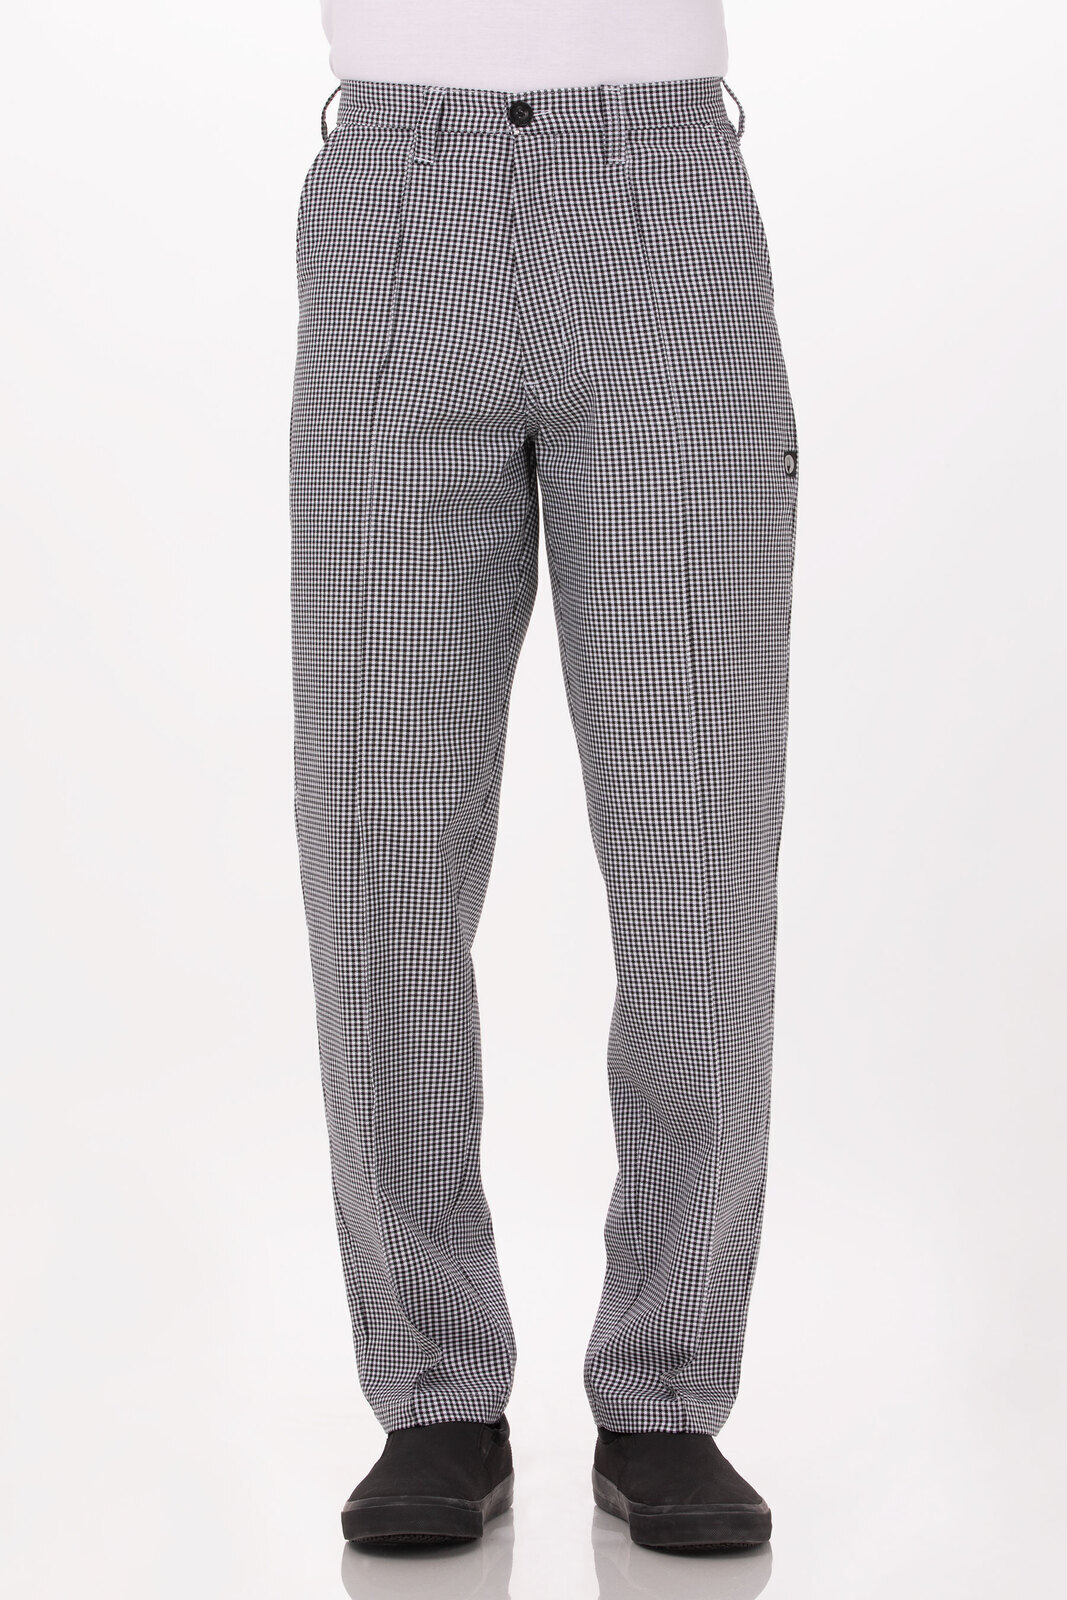 Chef Works Small Check Fitted Chef Pant - BWCP